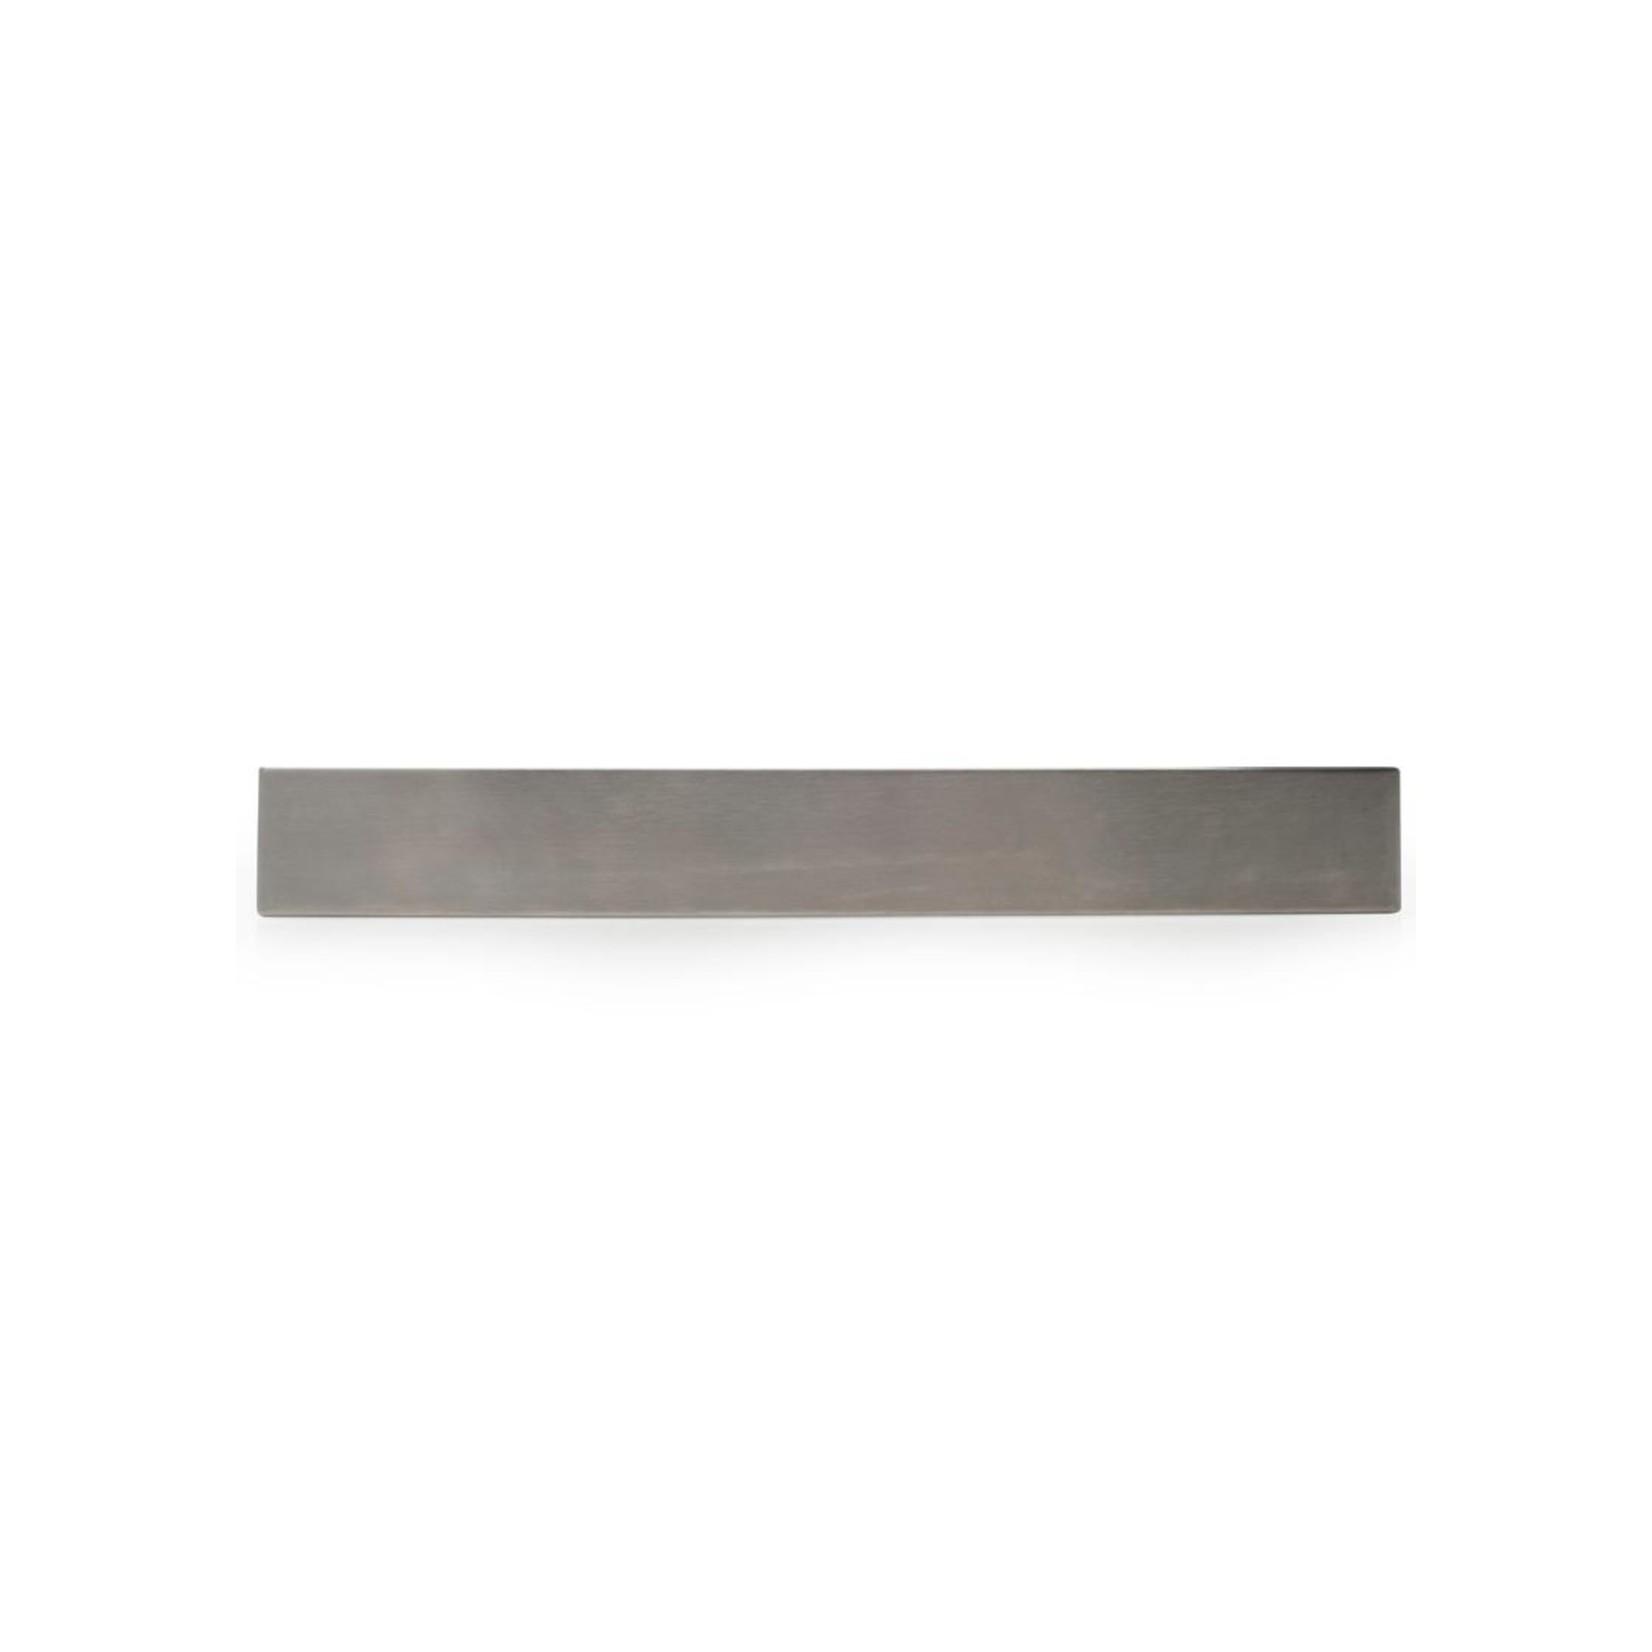 DANESCO 1710116SS - SUPPORT COUTEAU MAGNETIQUE STAINLESS 1,5'' x 14'' DANESCO